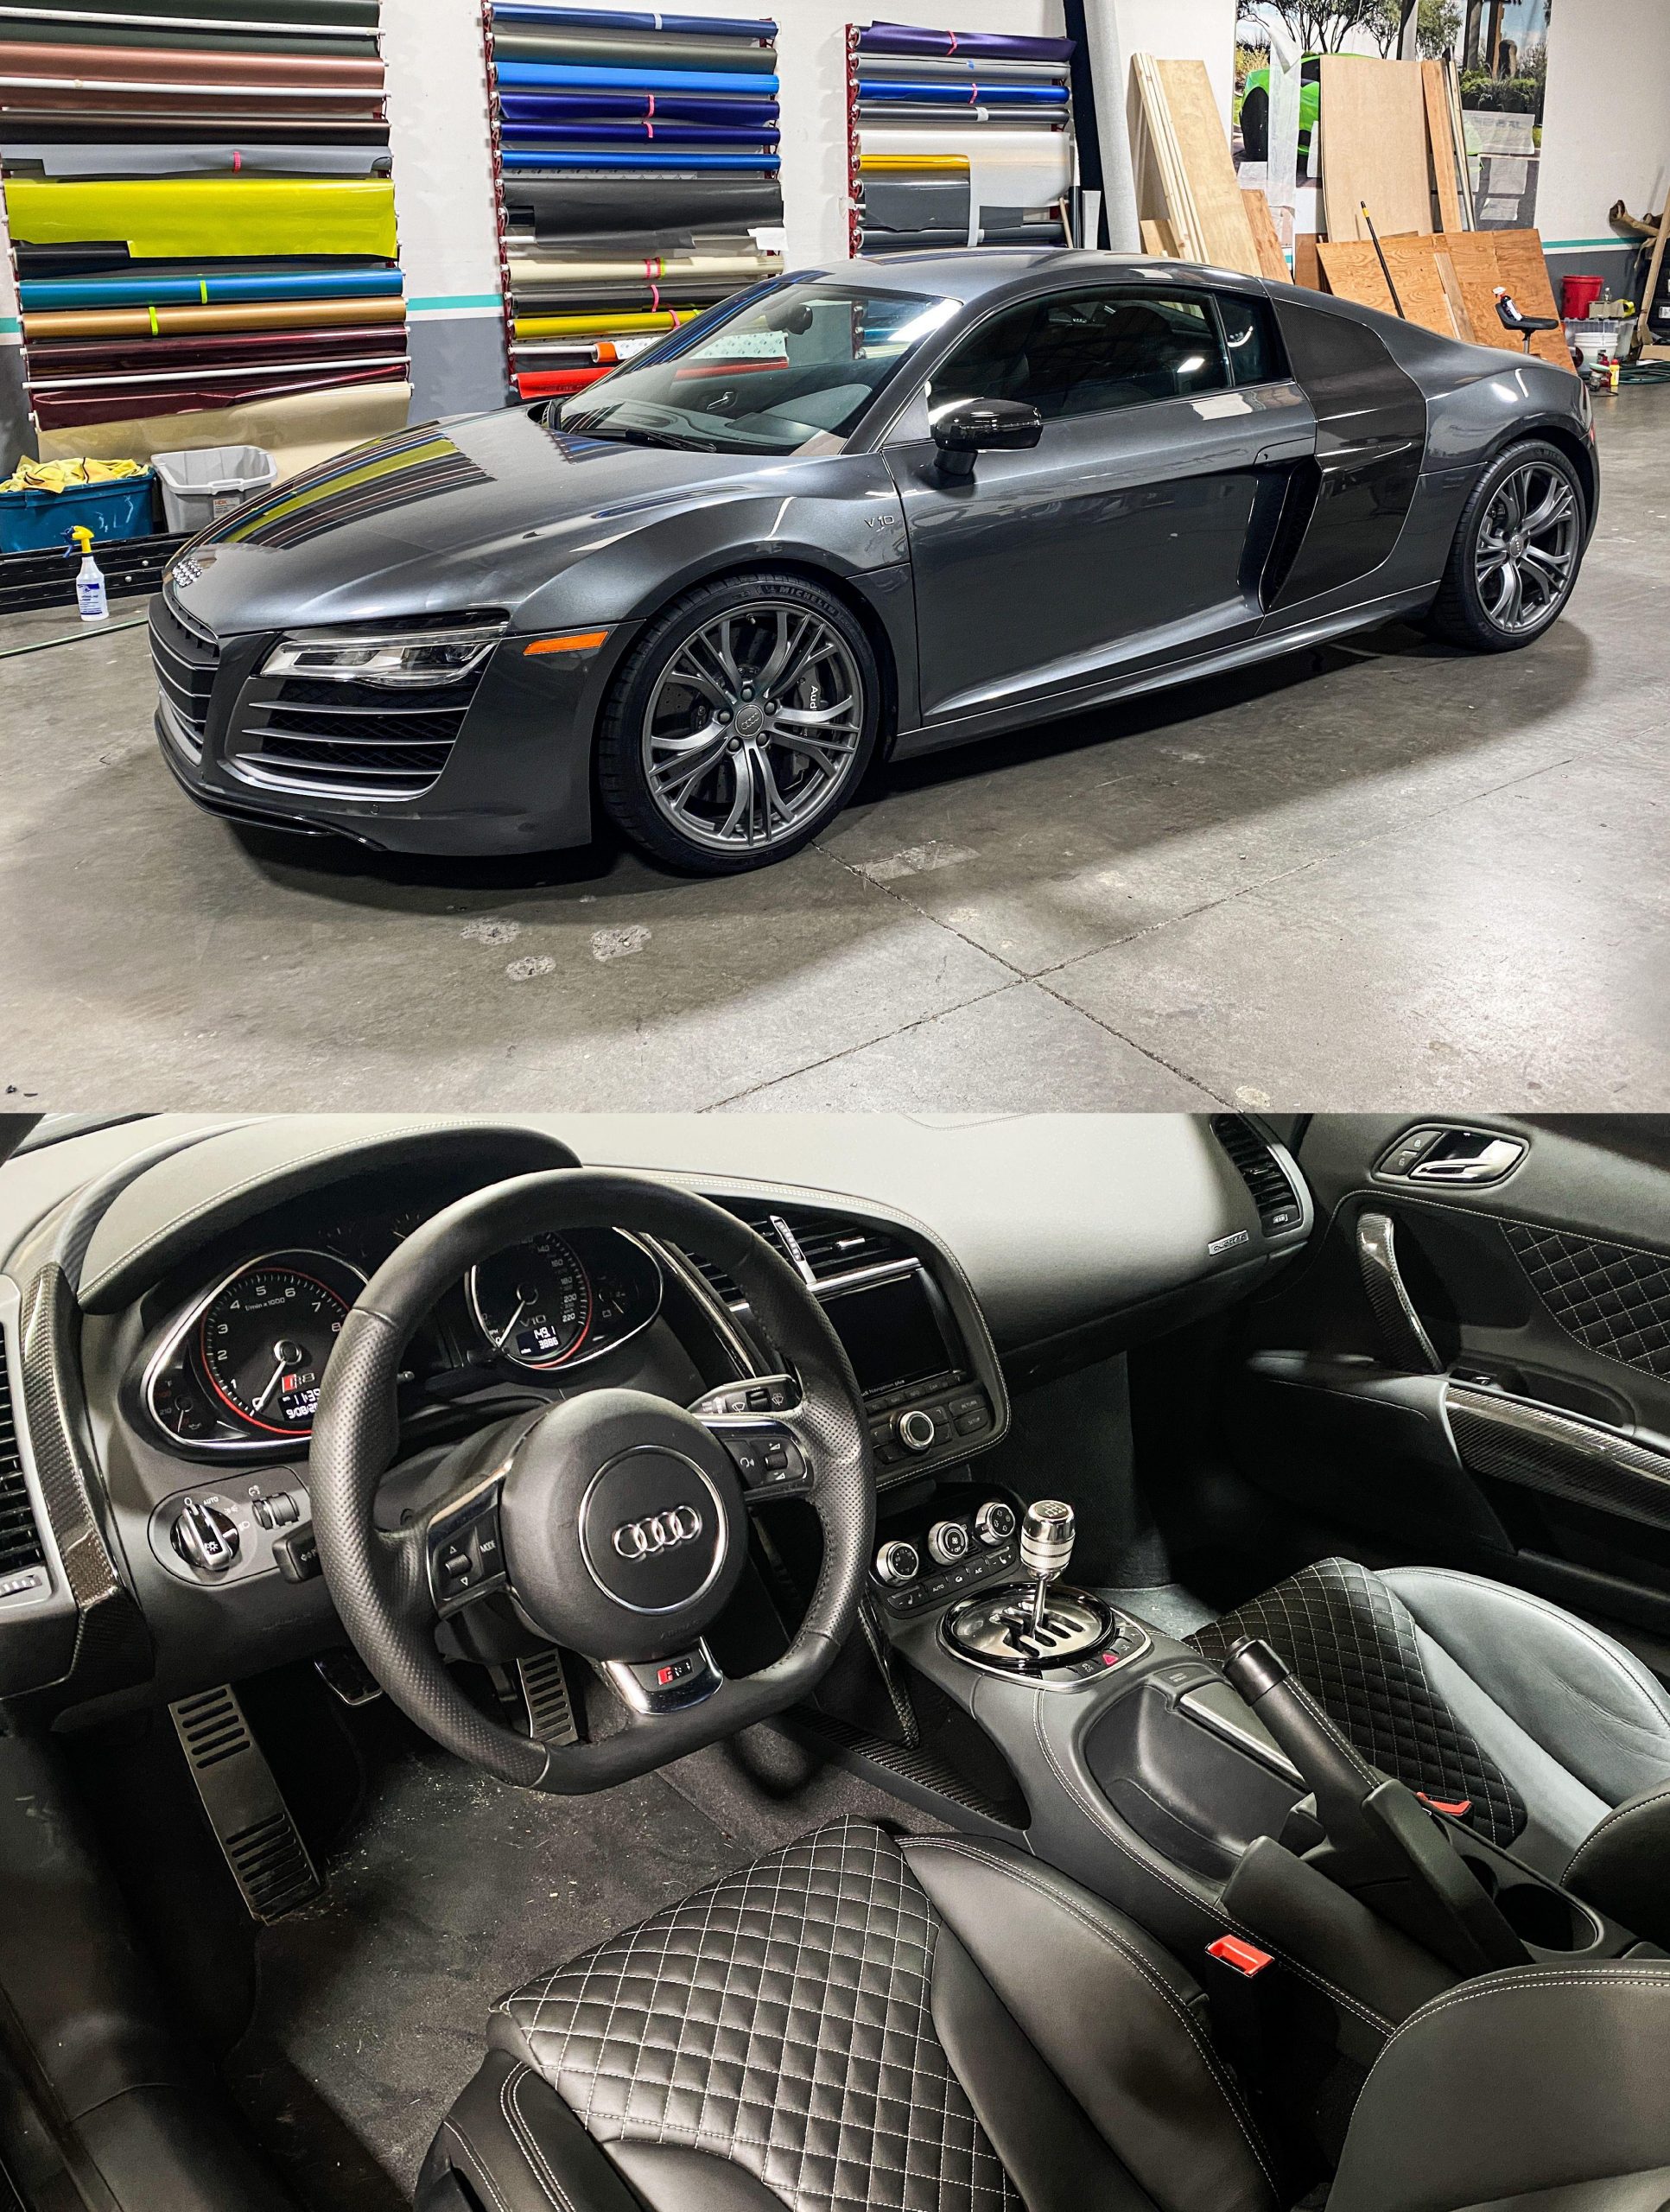 2014 V10 Audi R8 with gated manual. 3,886 miles on the odometer. In our shop for full PPF.